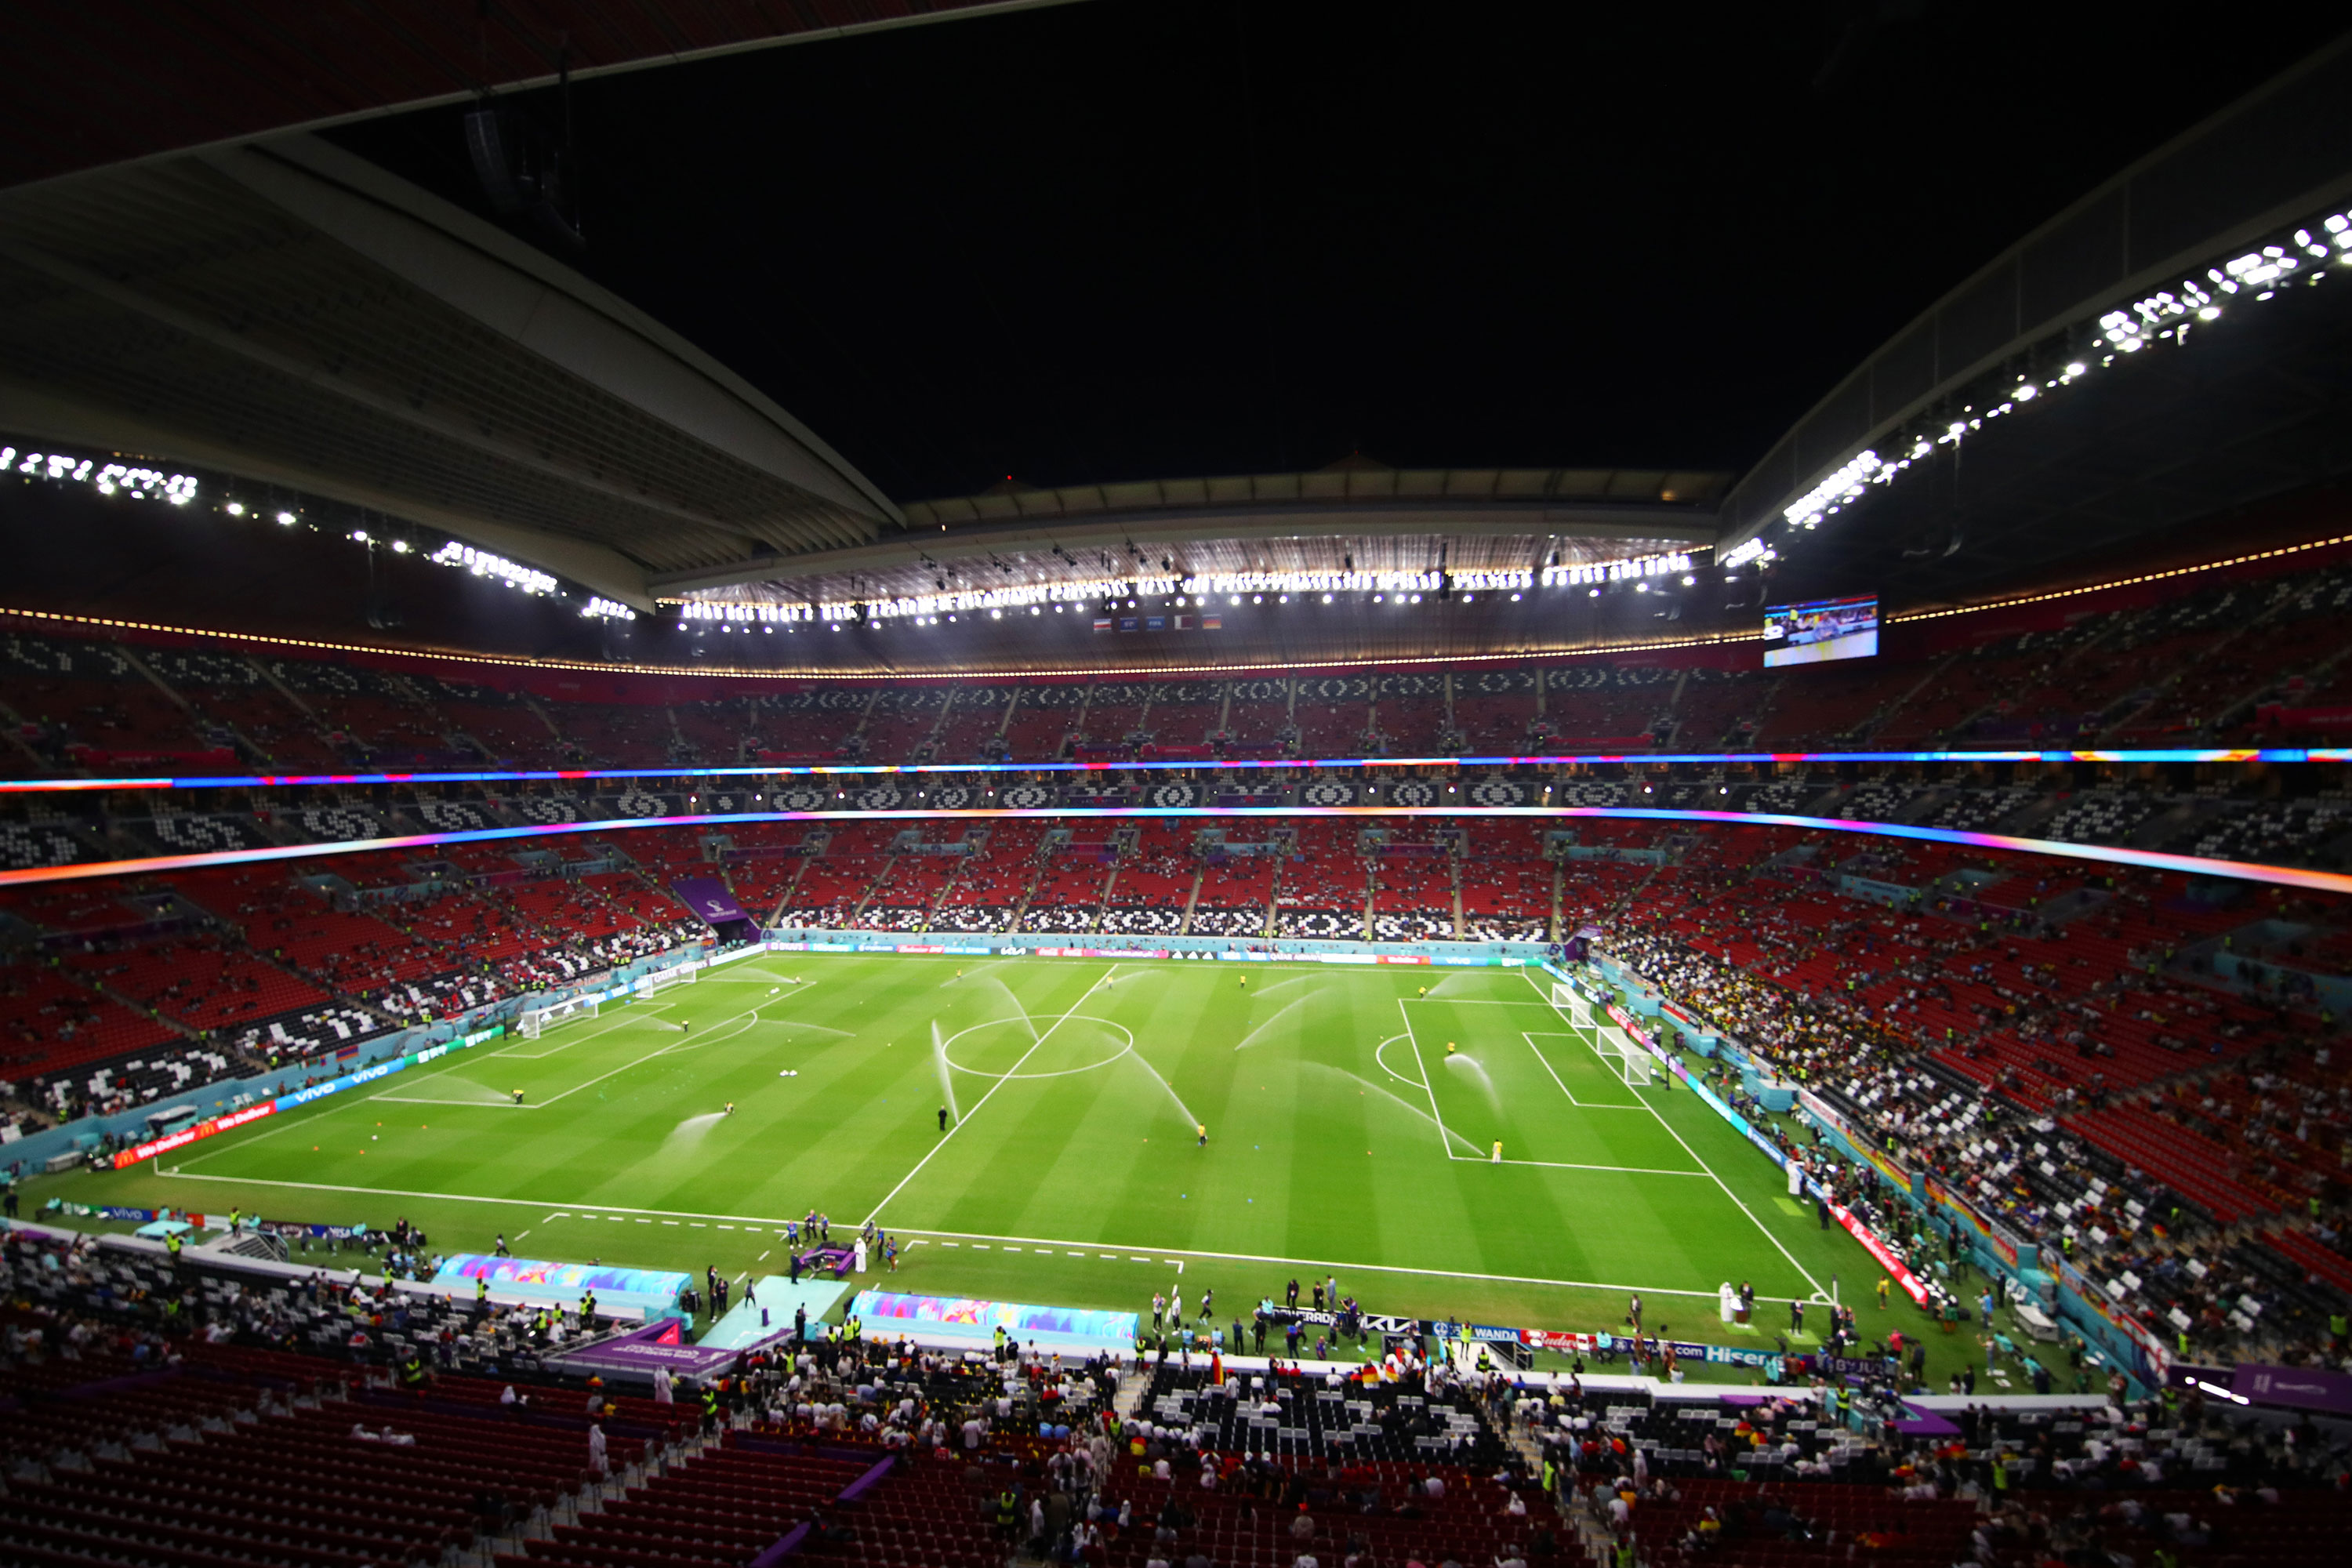 A general view inside Al Bayt Stadium prior to the match between Costa Rica and Germany on Thursday.